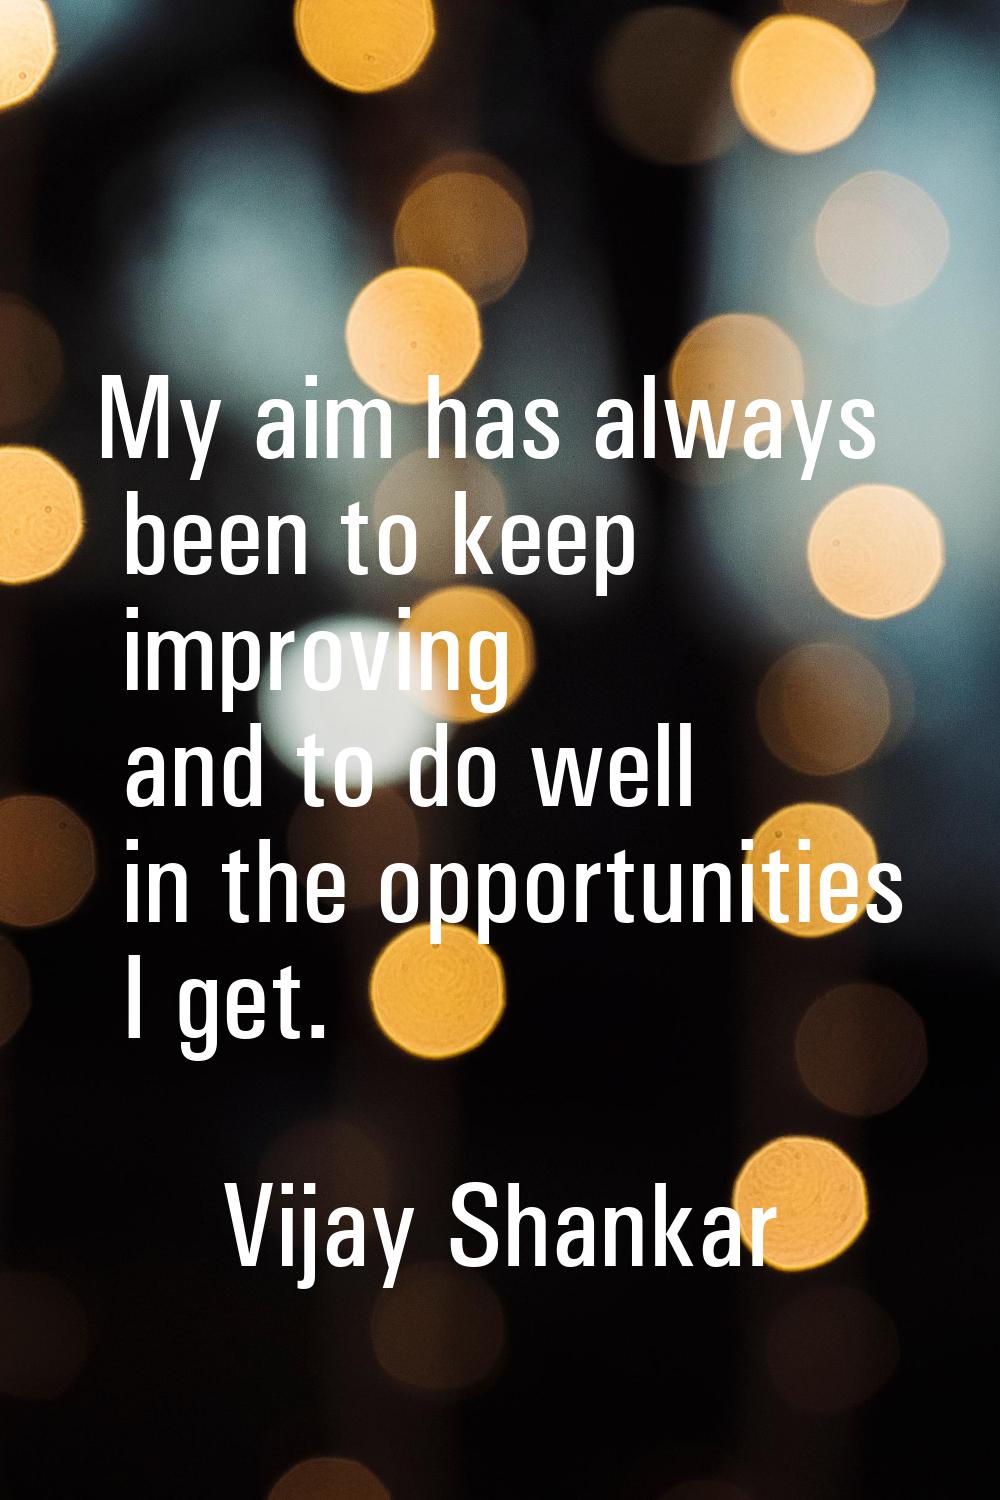 My aim has always been to keep improving and to do well in the opportunities I get.